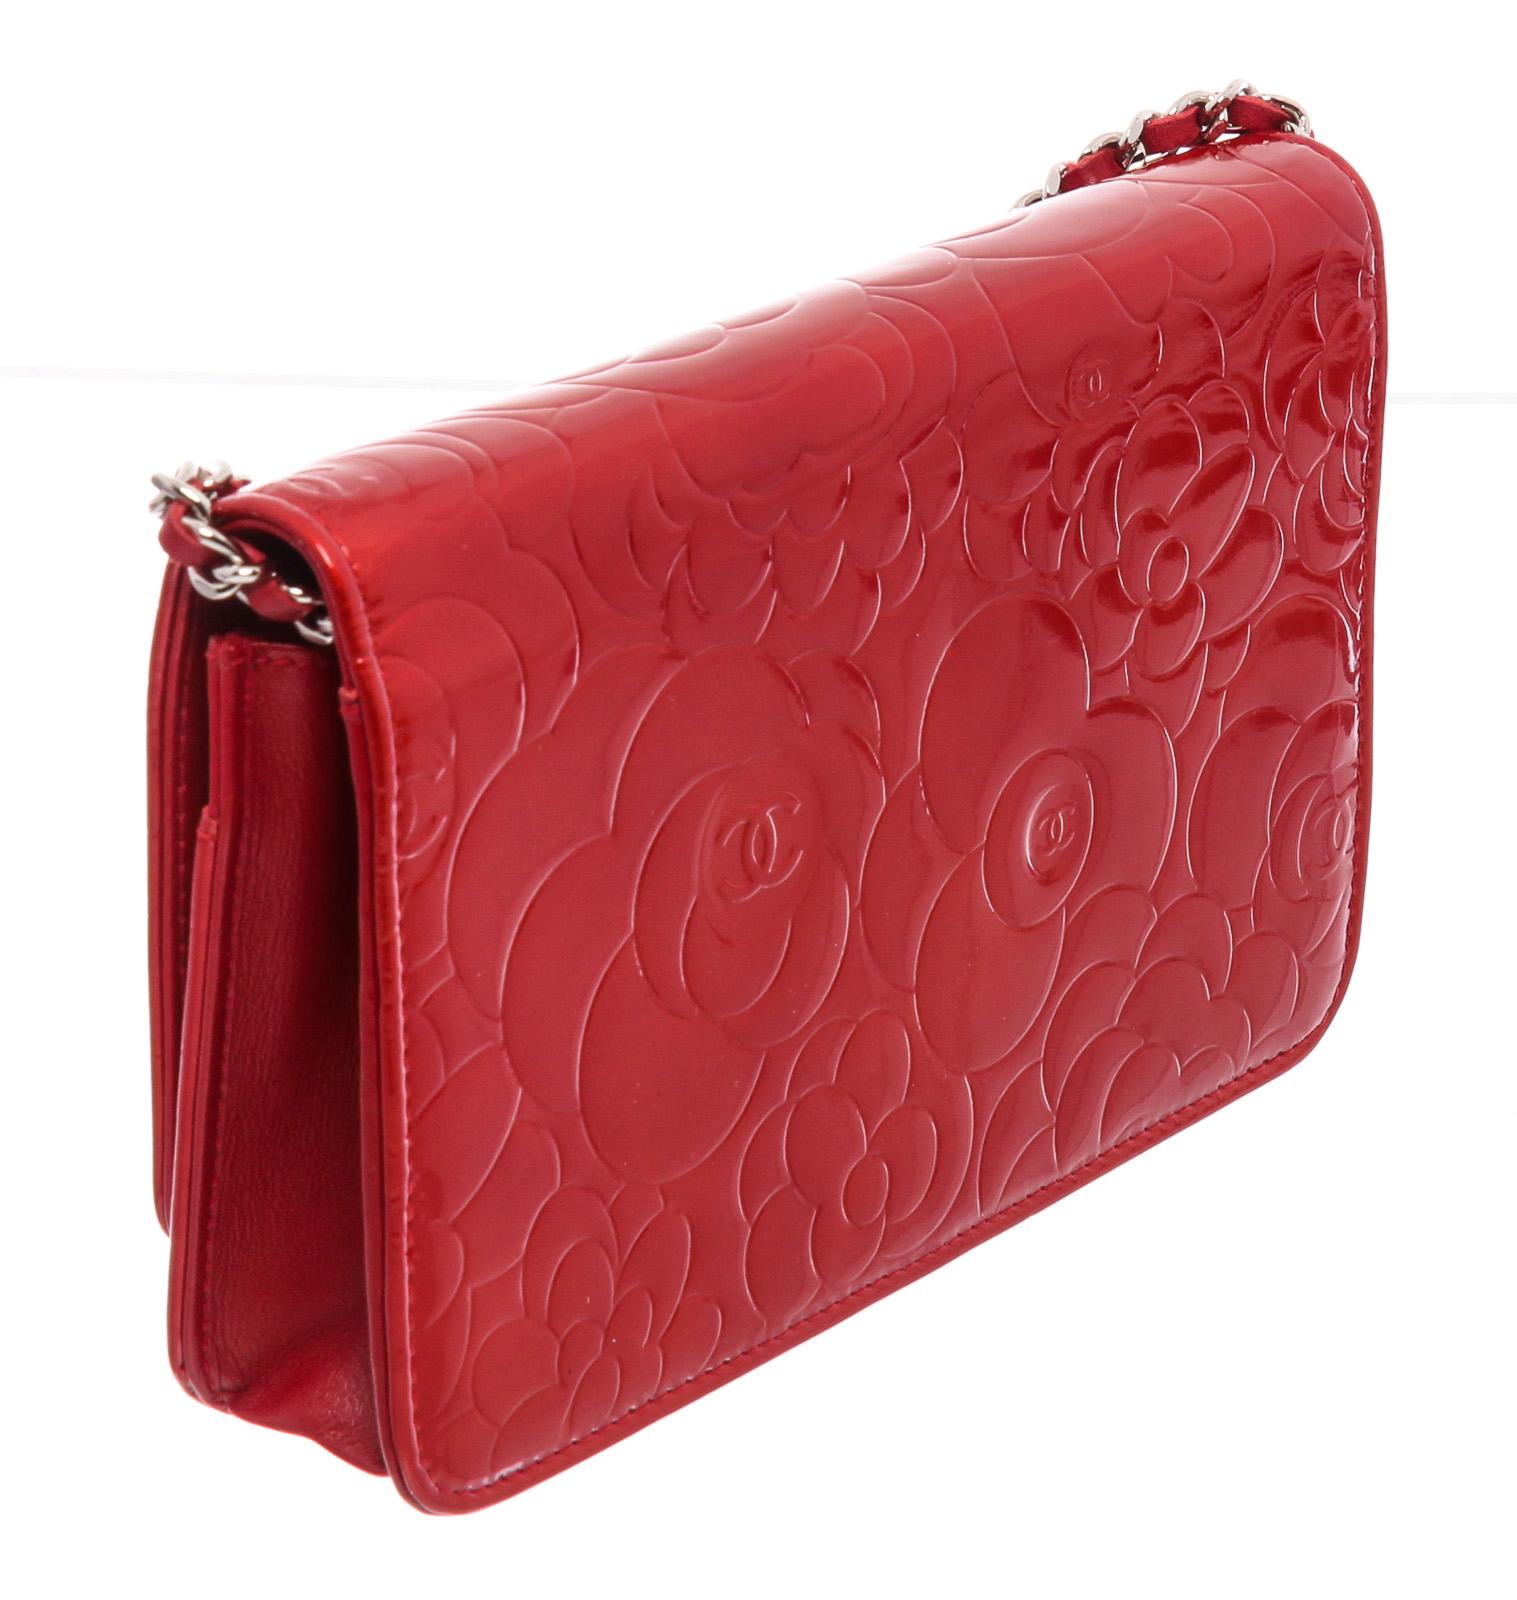 Red Camellia embossed patent leather Chanel Wallet On Chain with silver-tone hardware, single chain-link and leather shoulder strap, CC logo adornment at front, single zip pocket at flap underside, single slit pocket under front flap, tonal satin